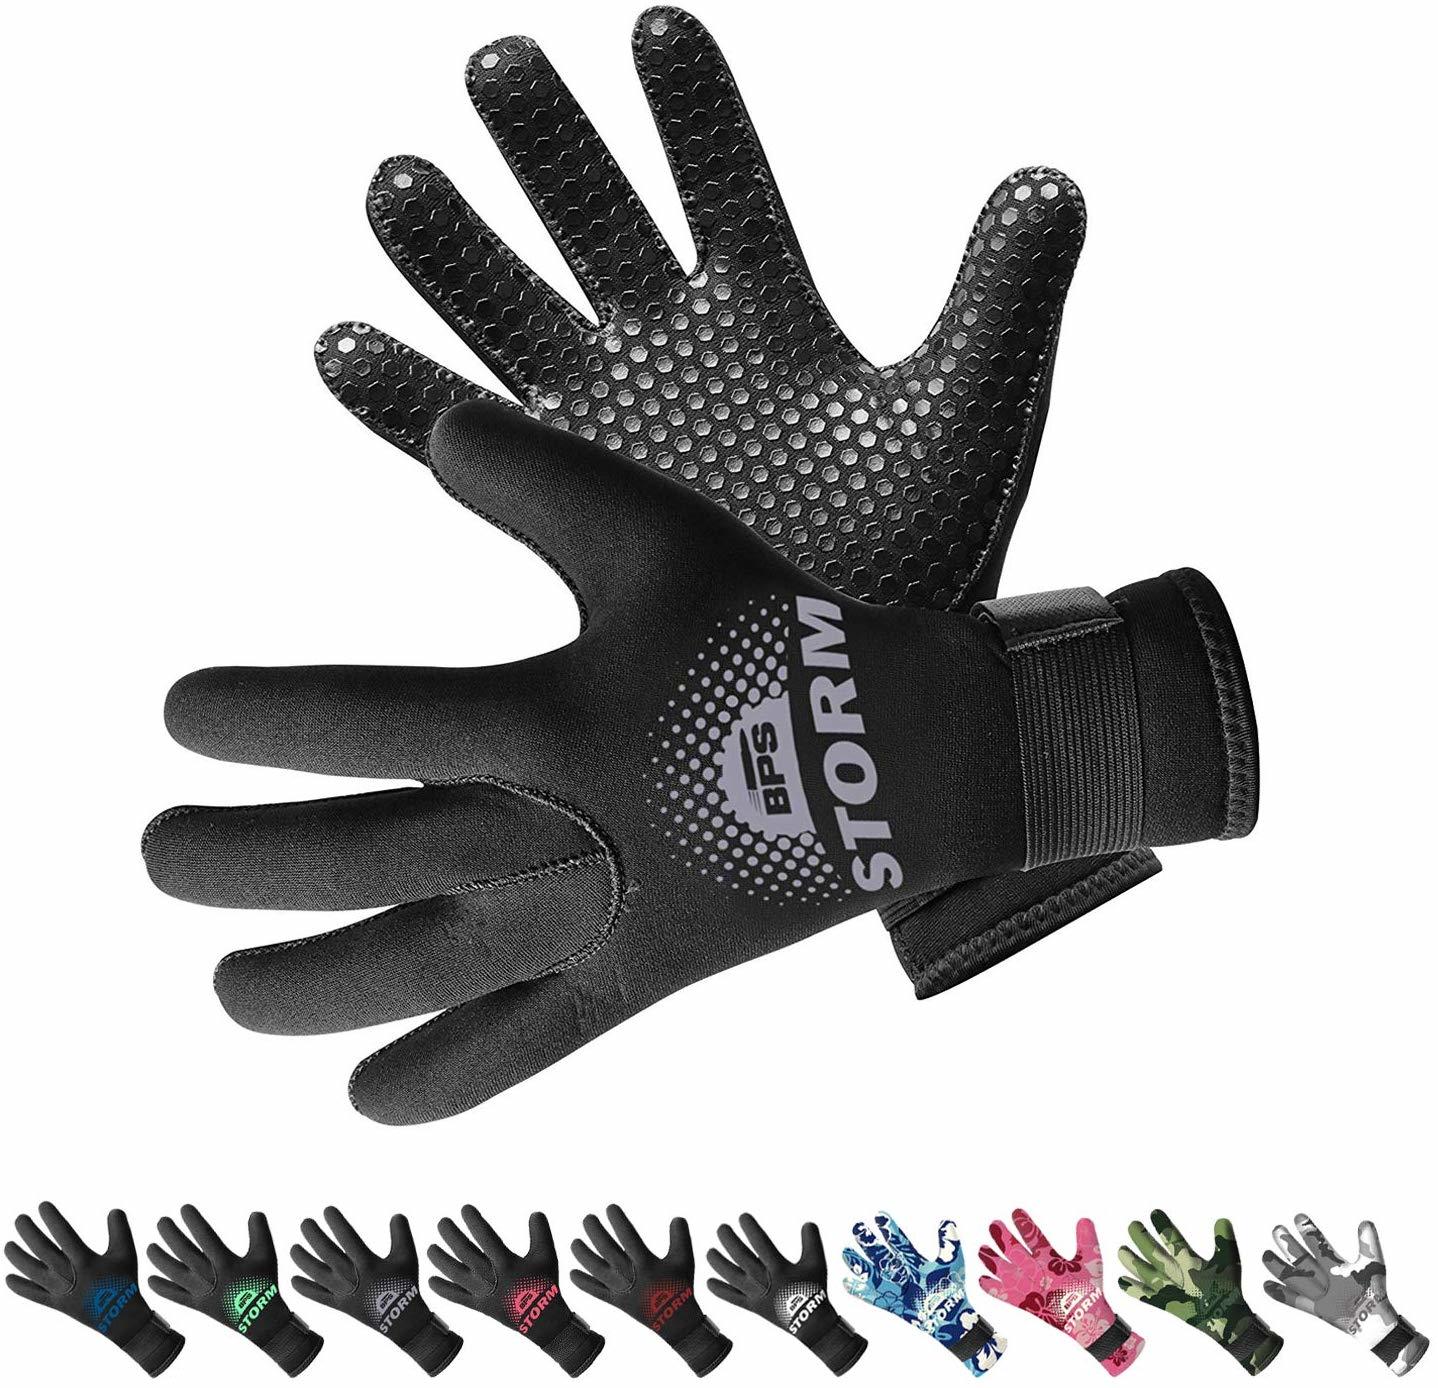 10 Sailing Gloves that will Protect Your Hands While Doing Water Sports 5